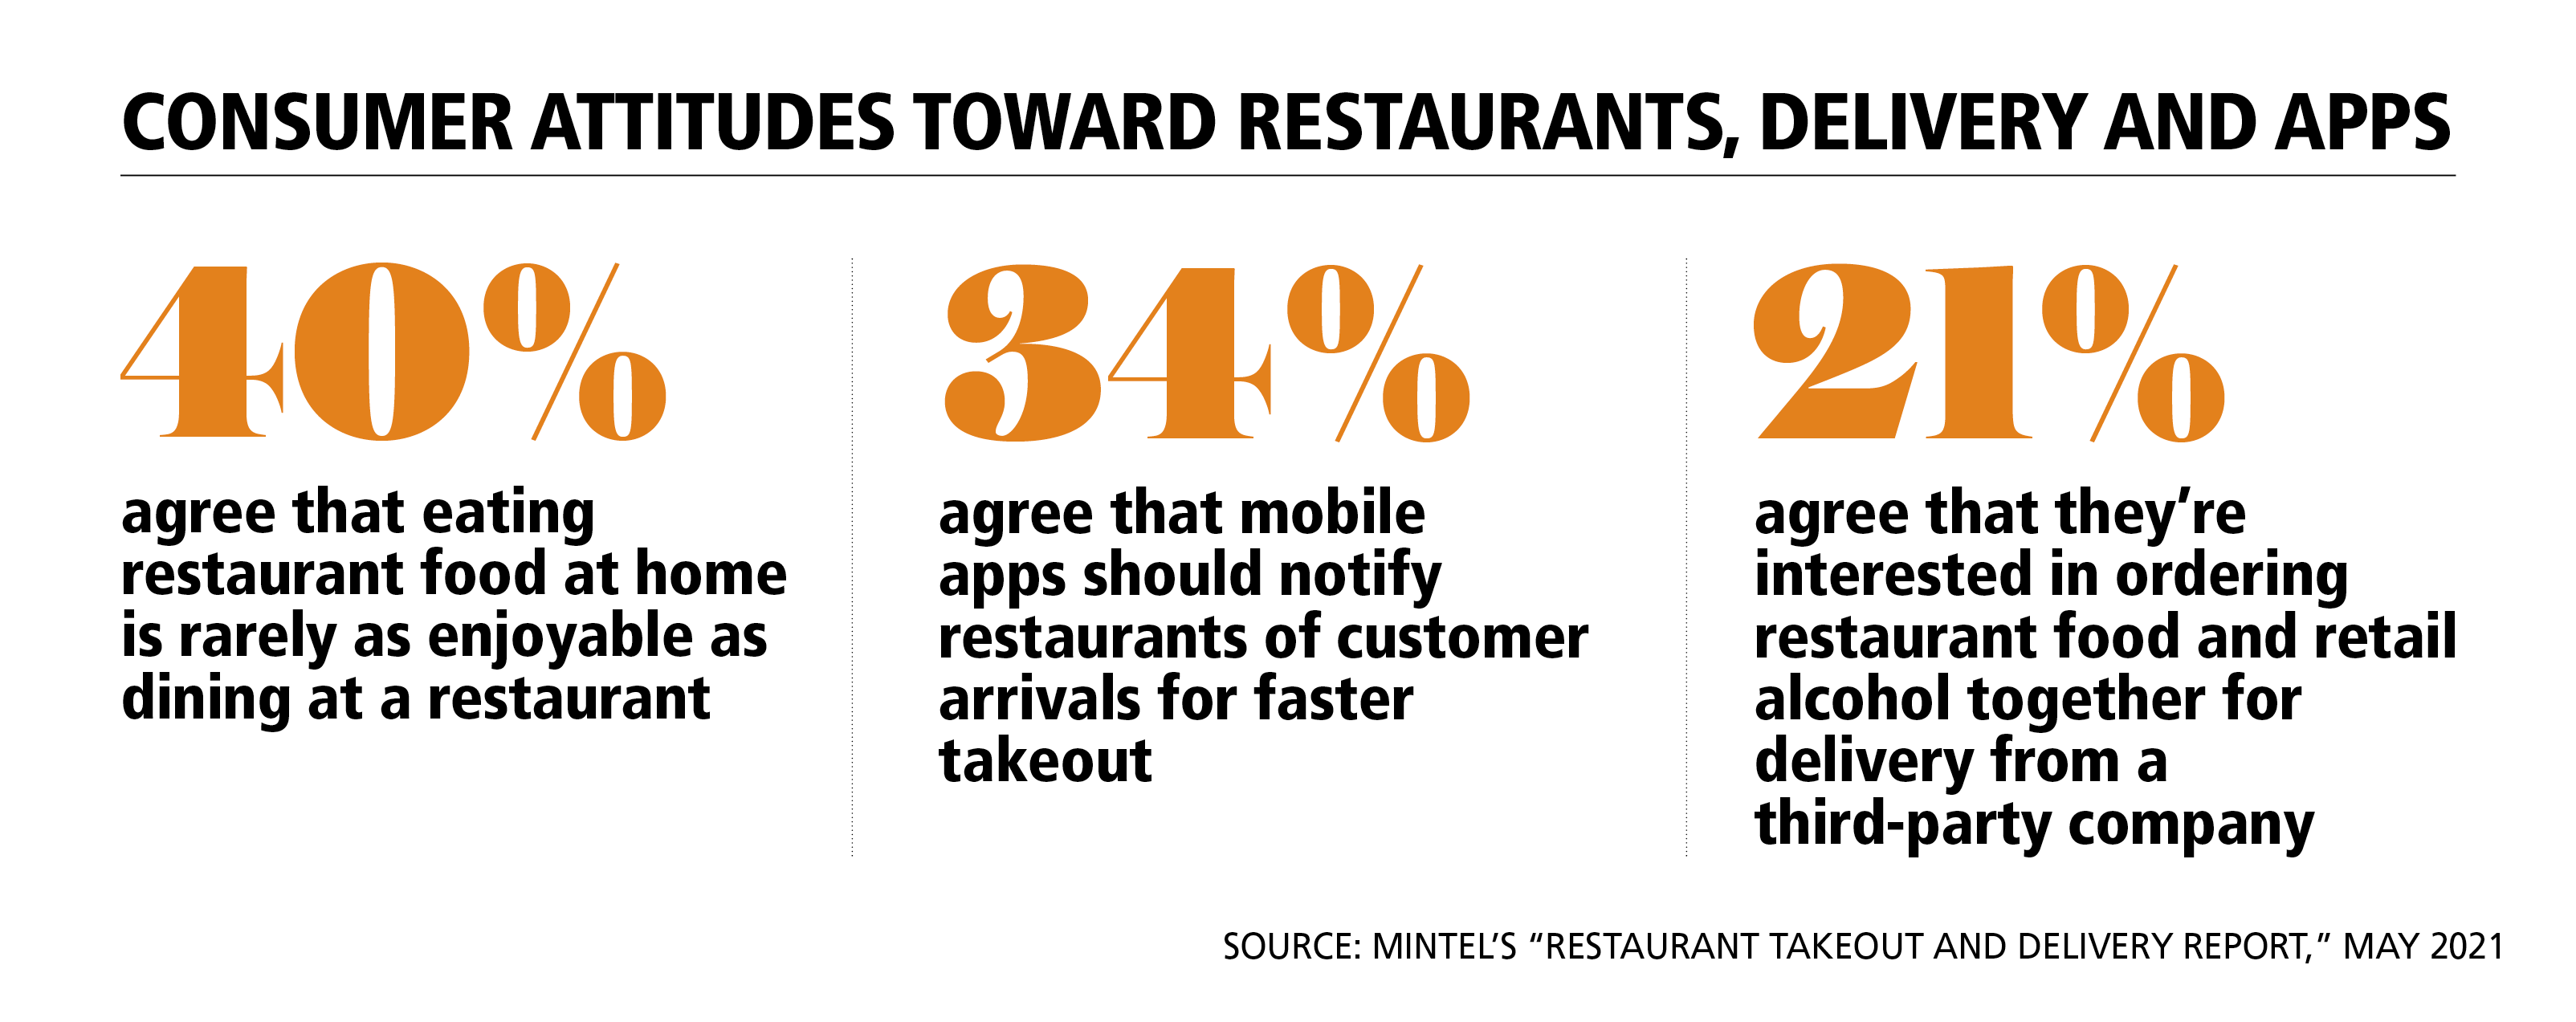 CONSUMER ATTITUDES TOWARD RESTAURANT, DELIVERY AND APPS2.png